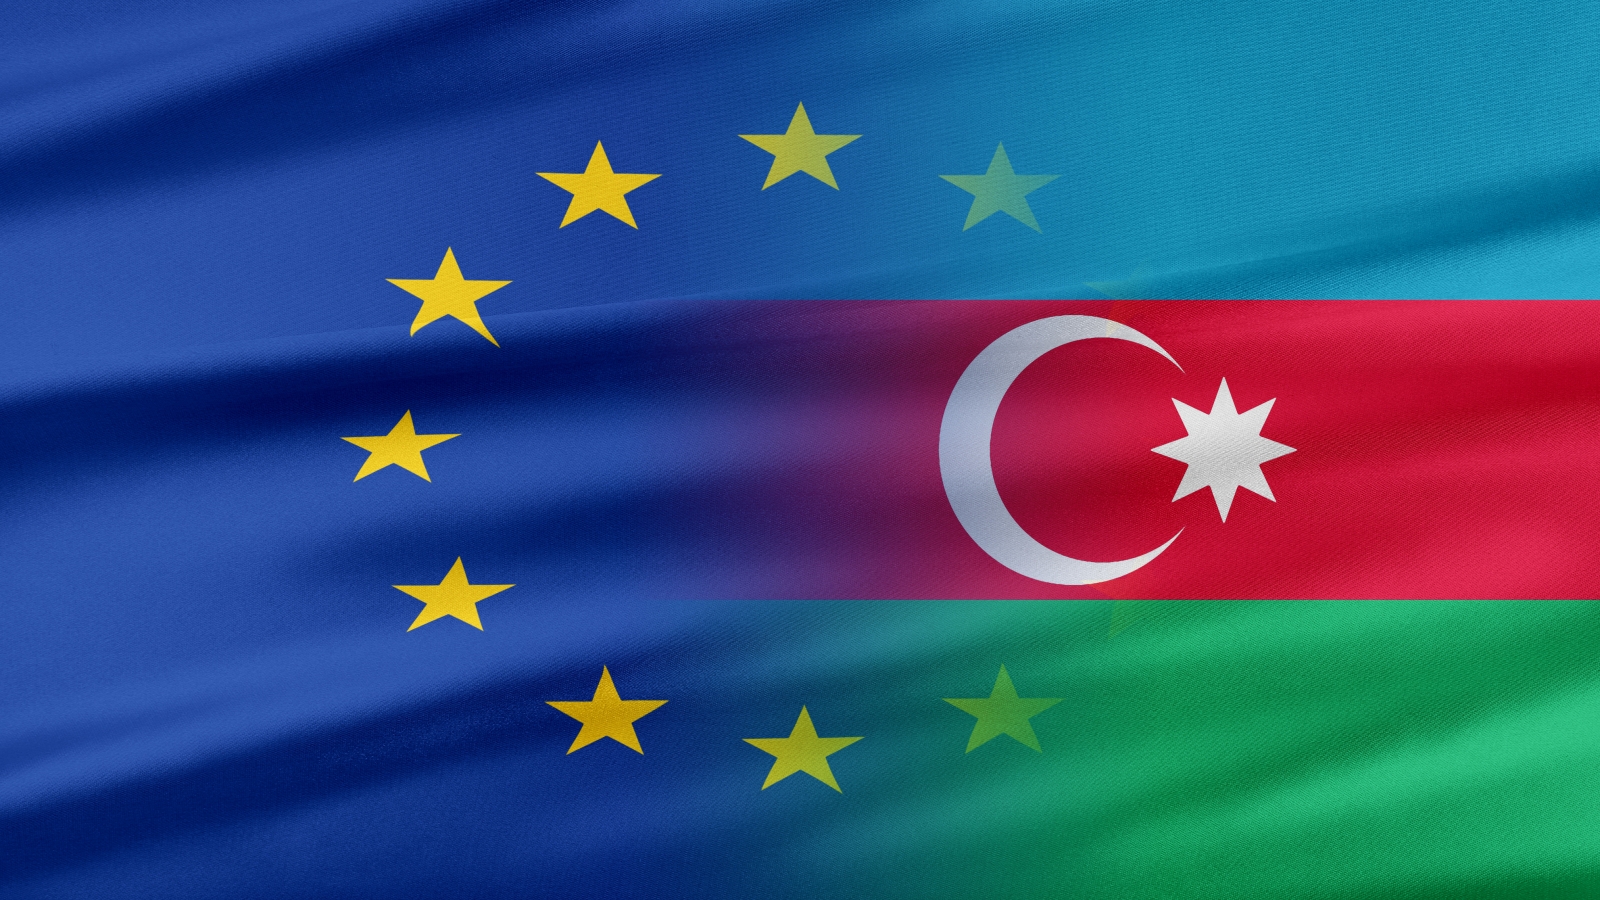 Newly appointed Head of EU Delegation to Azerbaijan welcomes release of journalist